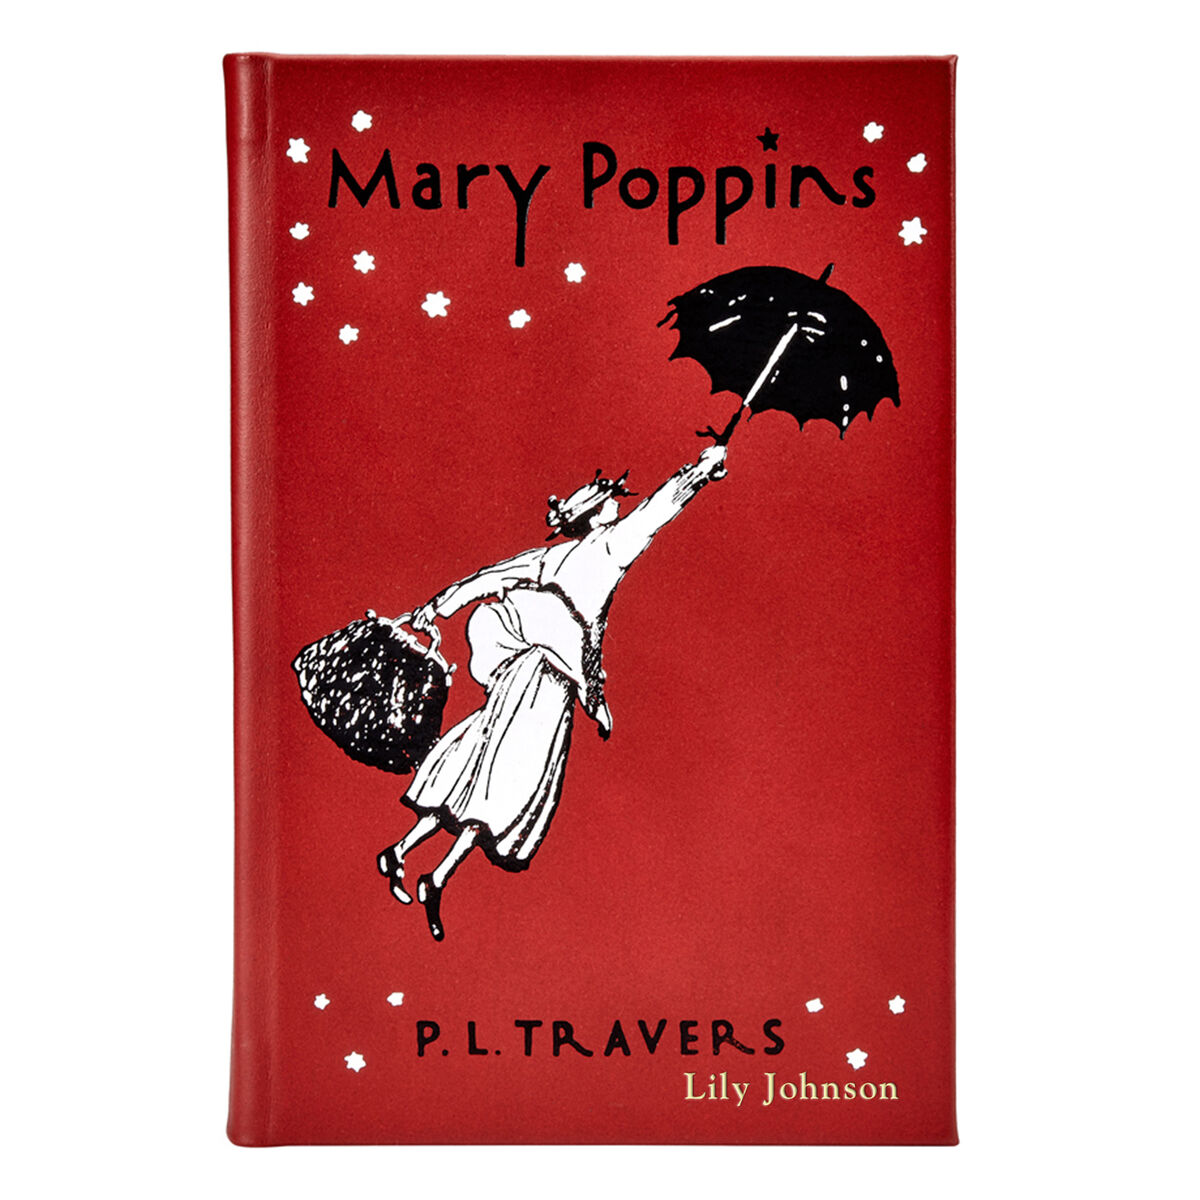 Personalized Leather Bound Mary Poppins Book